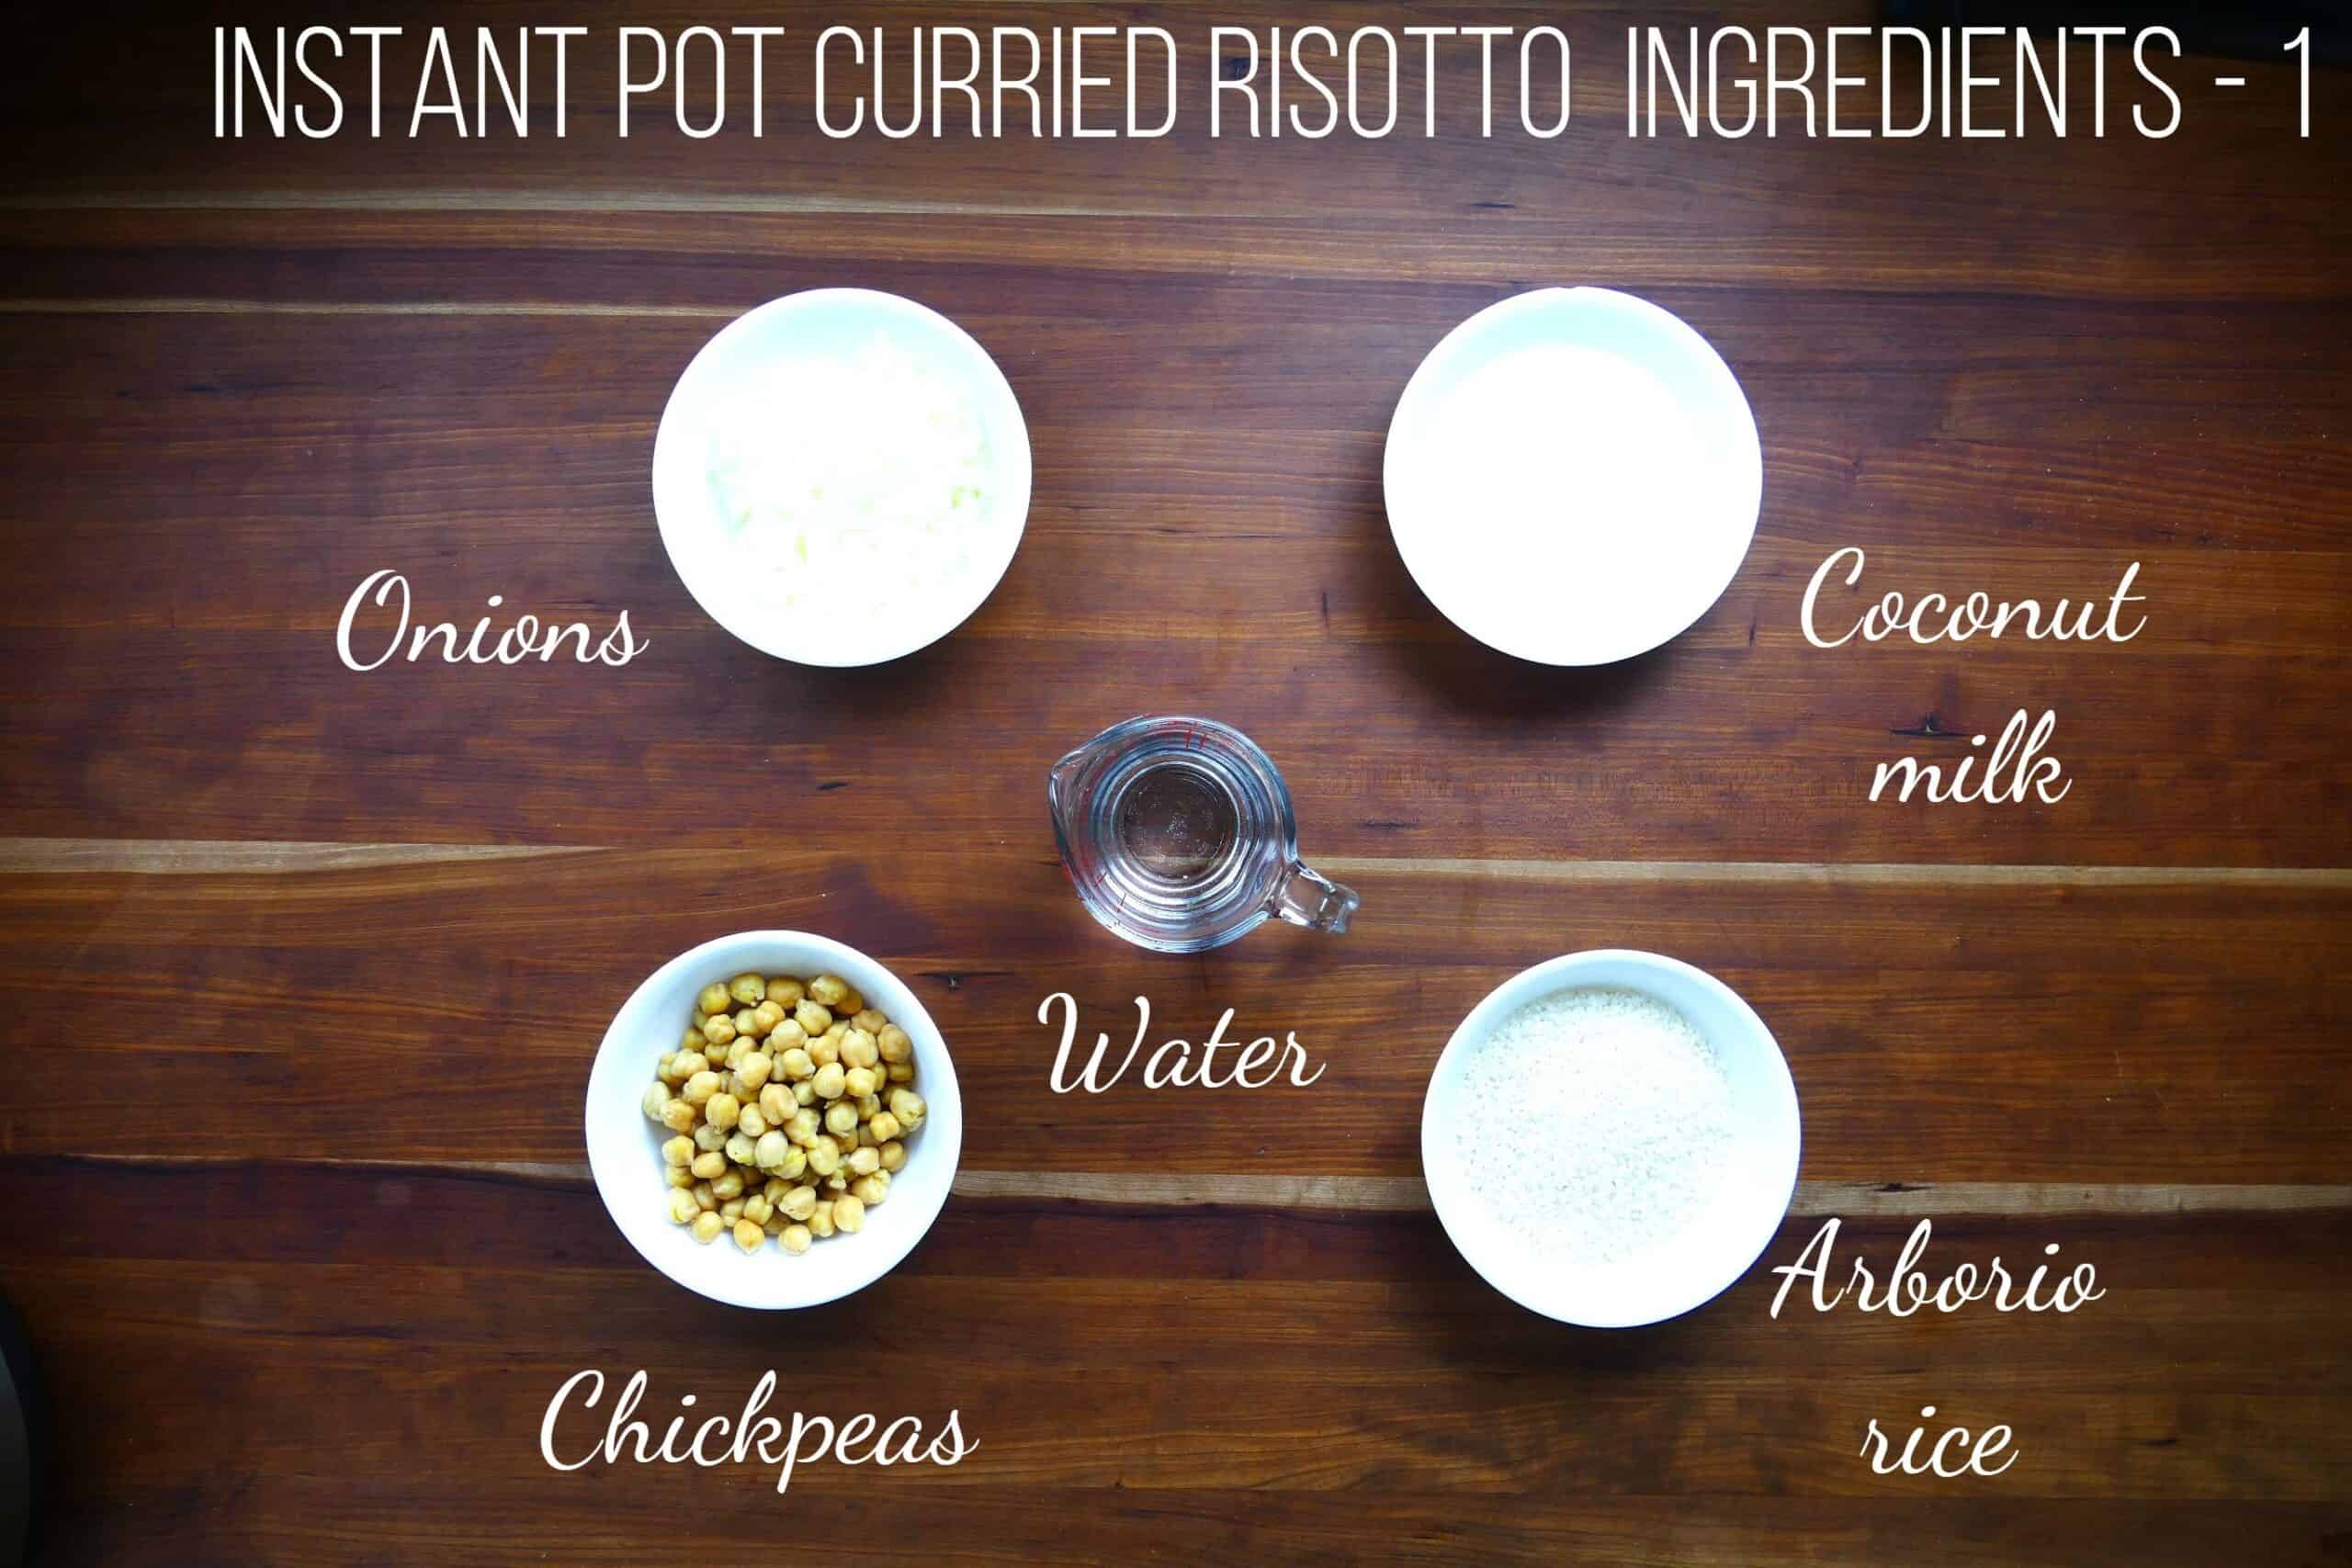 Instant Pot Curried Risotto Ingredients - onions, coconut milk, water, chickpeas, arborio rice